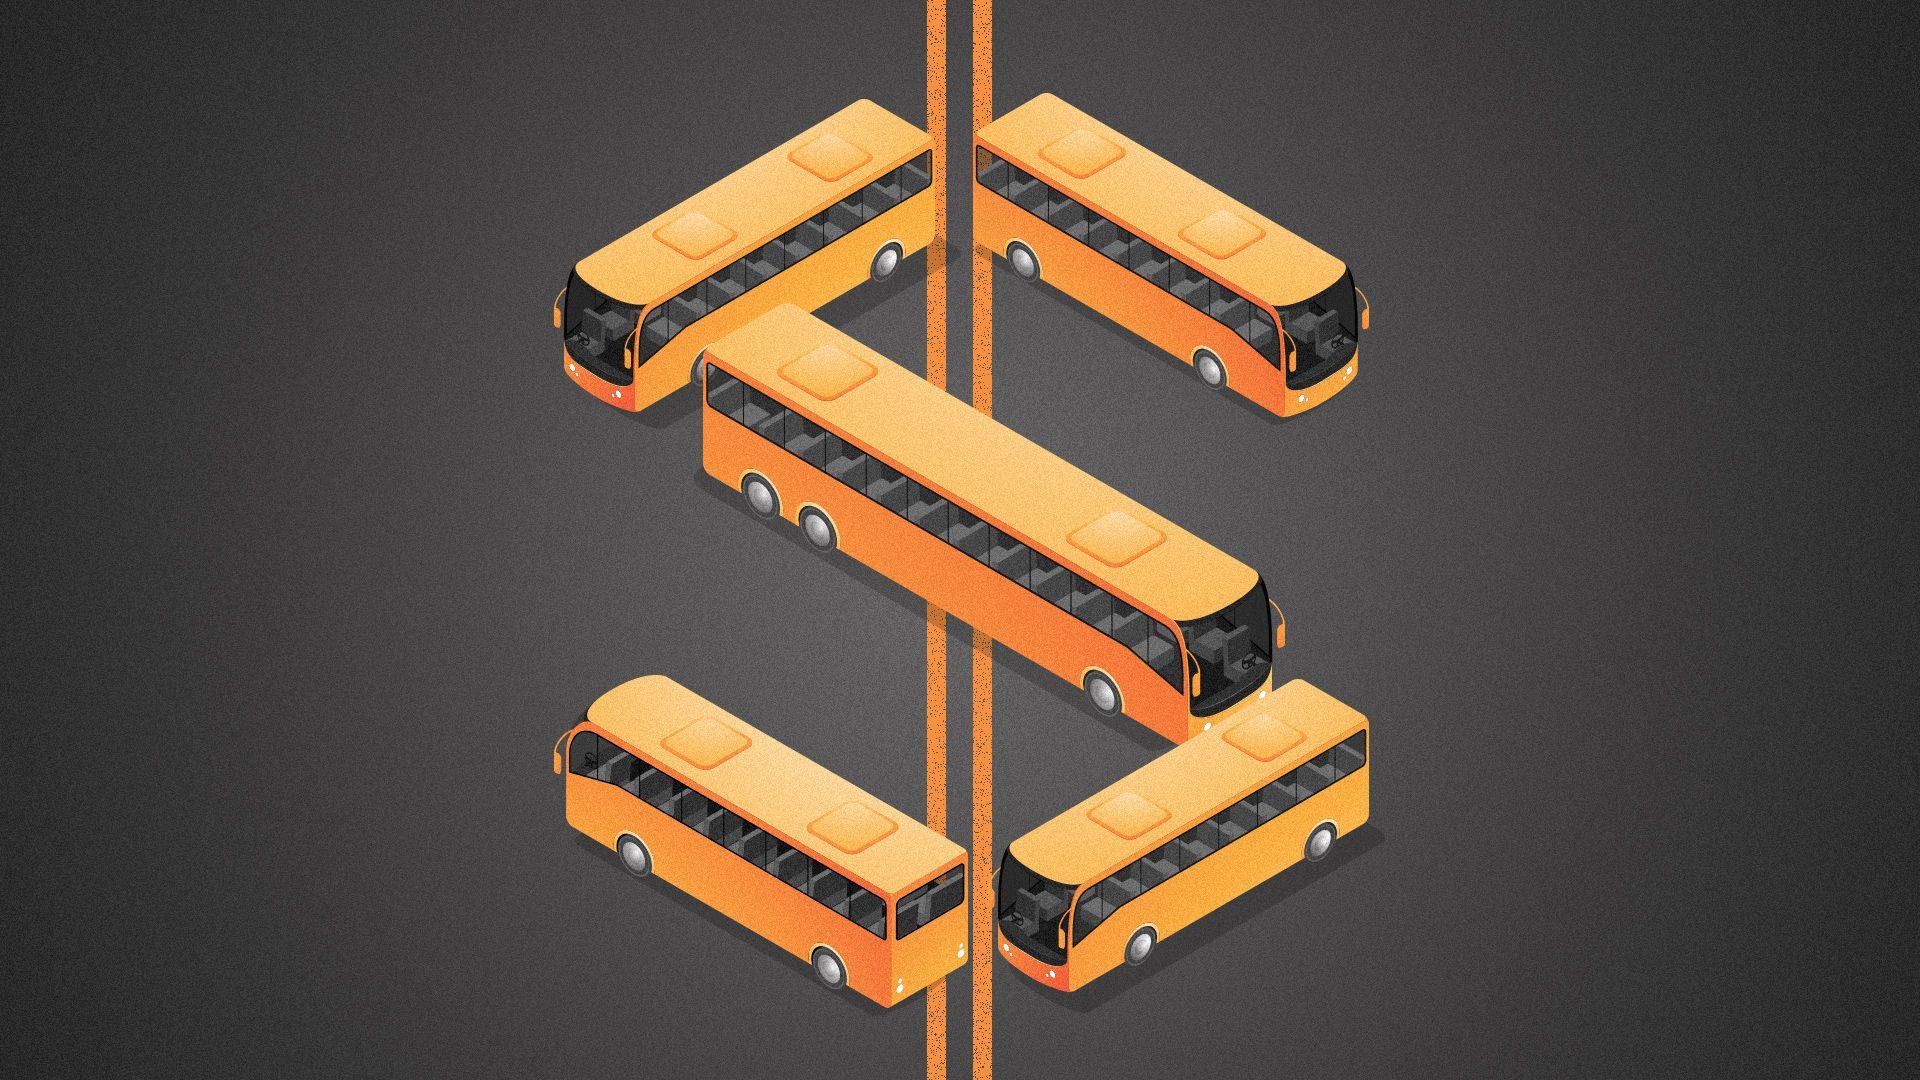 Illustration of a dollar sign made out of buses with the centerline made from the double yellow lines on a road.  